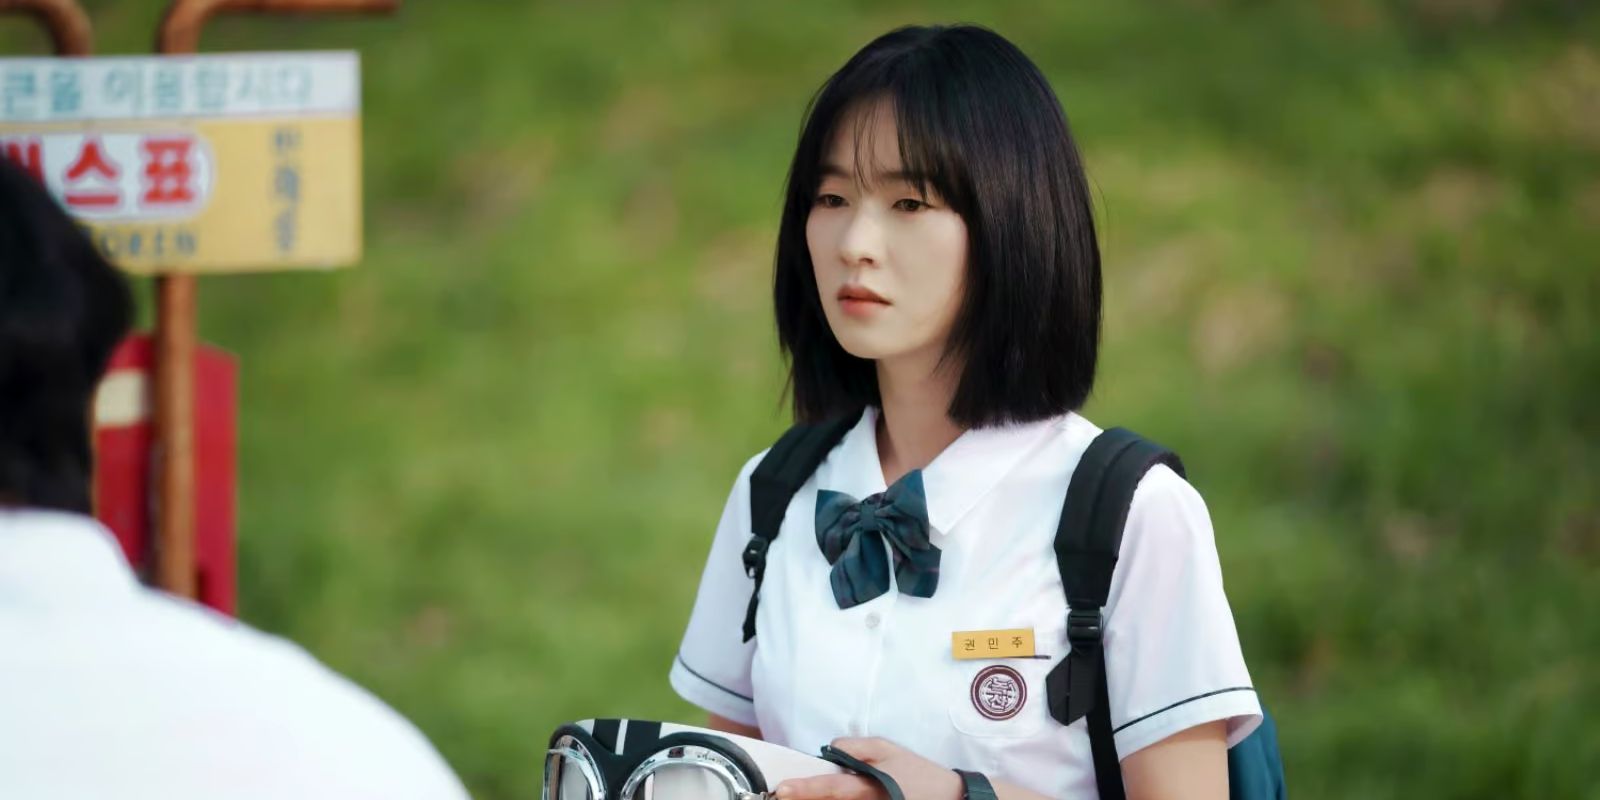 Min-ju holds a bike helmet in her hands while looking at her friend.